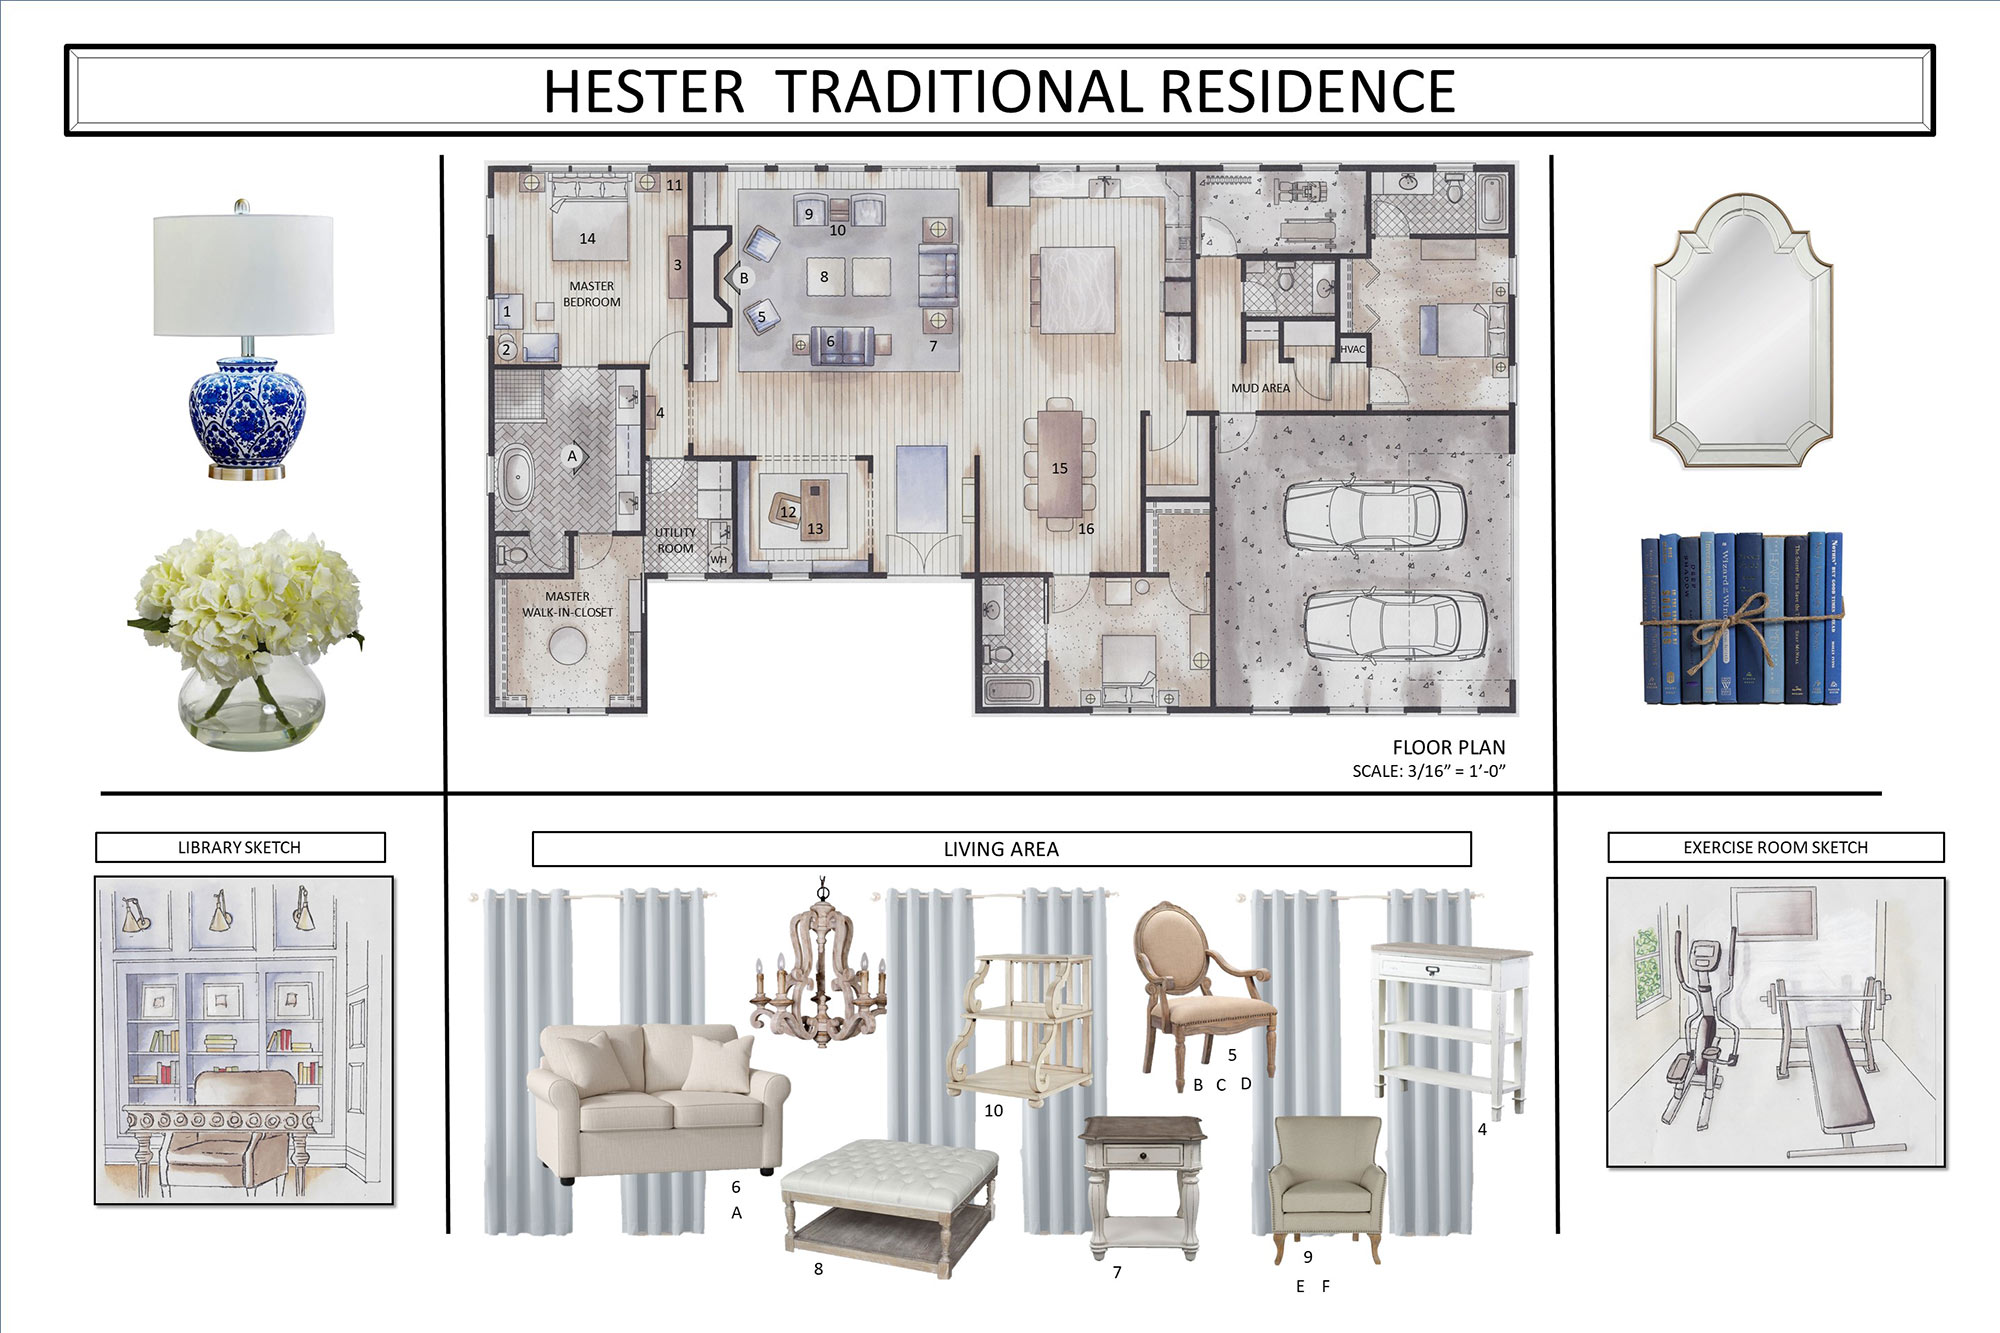 rendering titled "Hester Traditional Residence" - shows layout of interior of one story house with views of some of the stuff inside shown on left and right (lamp, mirror, flowers, books); bottom (l to r): library sketch, living area layout, and exercise area sketch